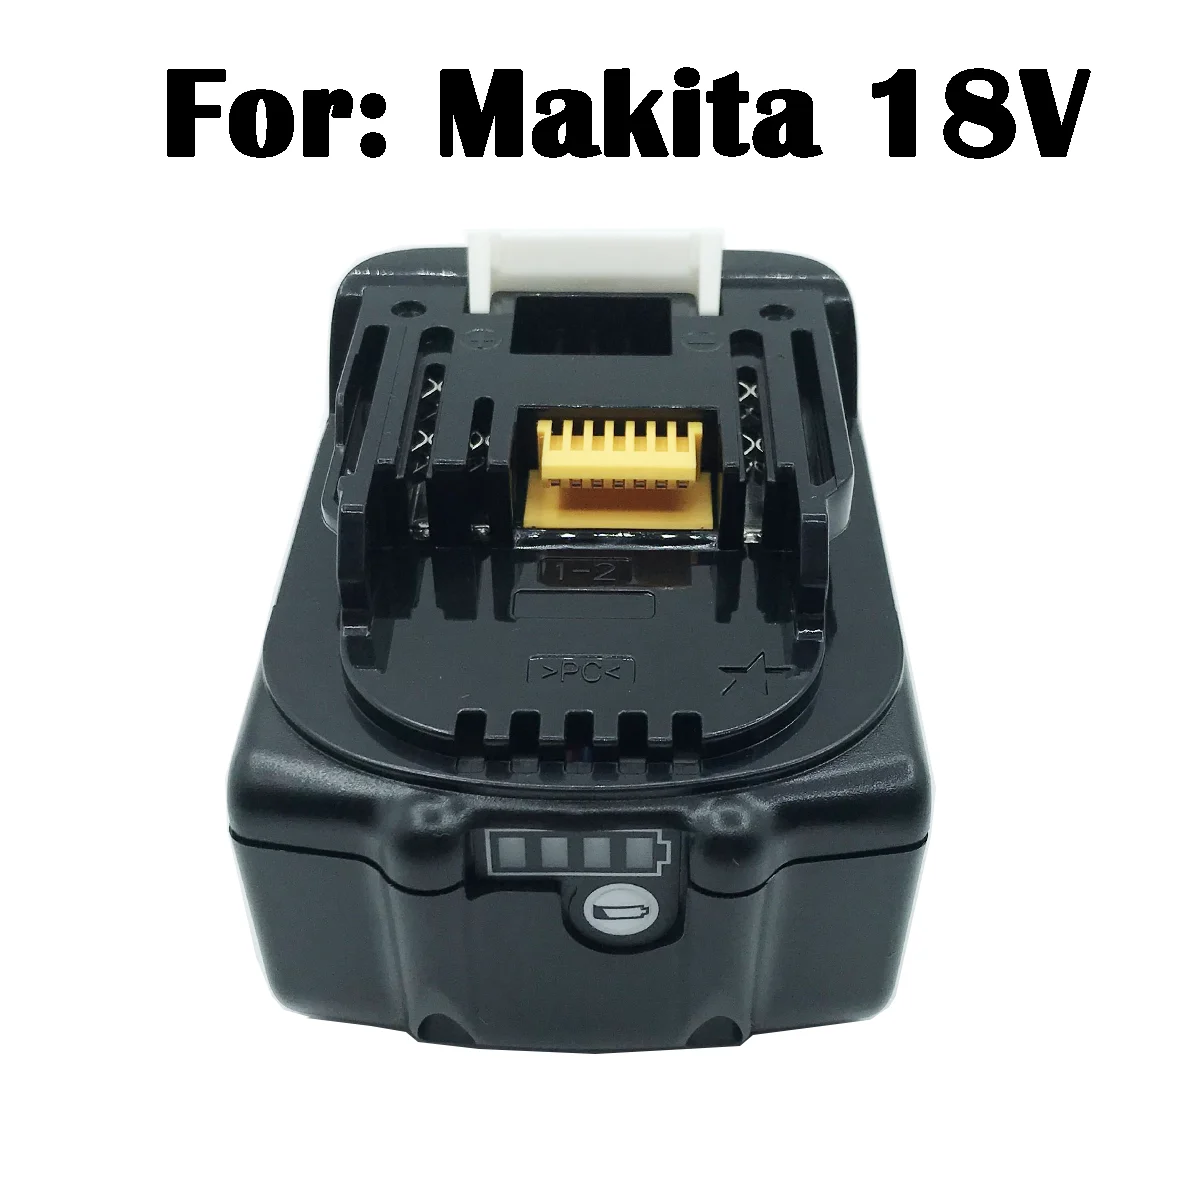 

For Makita Power Tool Battery BL1860 18V 6.0Ah Rechargeable Lithium Battery BL1815 BL1830 BL1840 BL1850 LXT 400